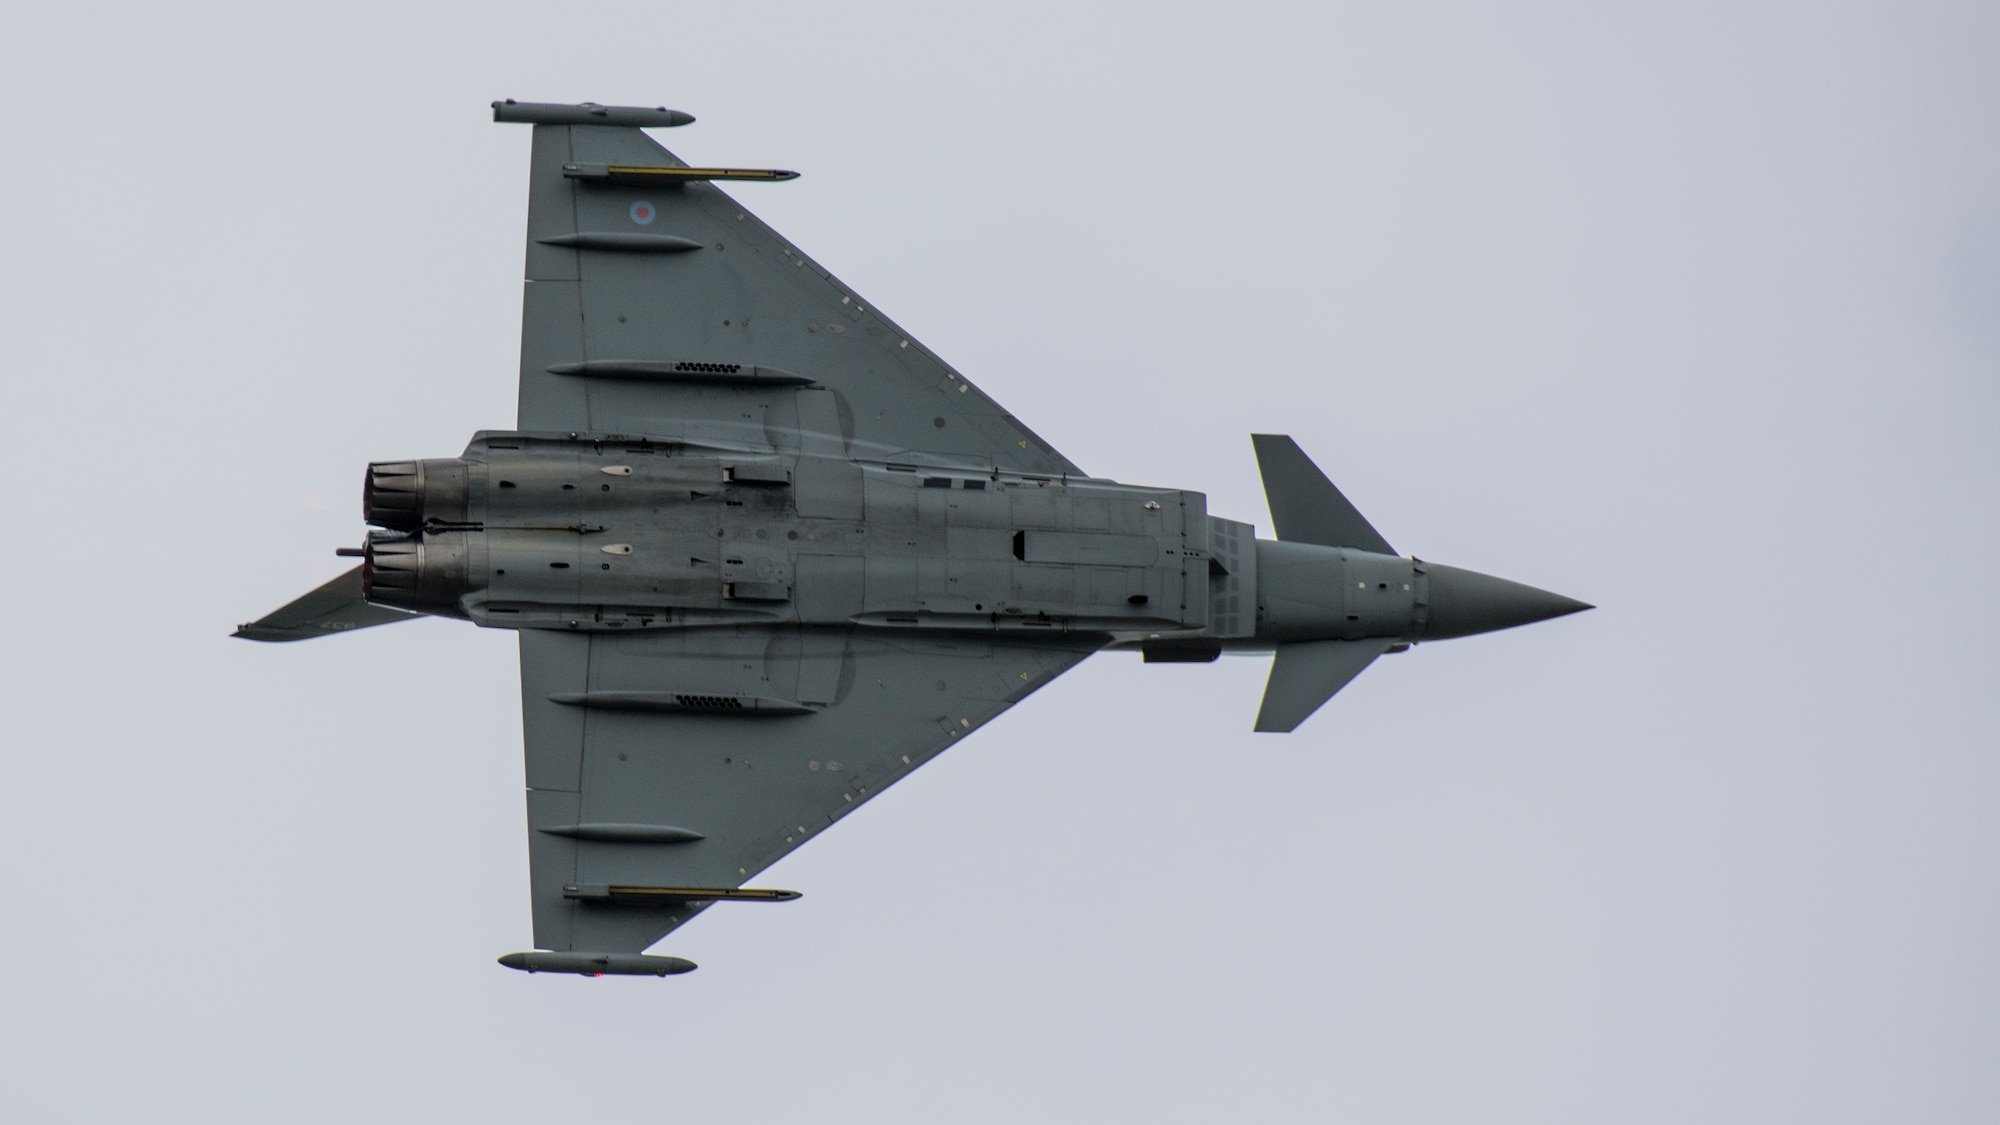 A Royal Air Force Eurofighter Typhoon FGR4 flies past the audience during the 2019 Royal International Air Tattoo at RAF Fairford, England, July 20, 2019. This year, RIAT commemorated the 70th anniversary of NATO and highlighted the United States' enduring commitment to its European allies. (U.S. Air Force photo by Airman 1st Class Jennifer Zima)